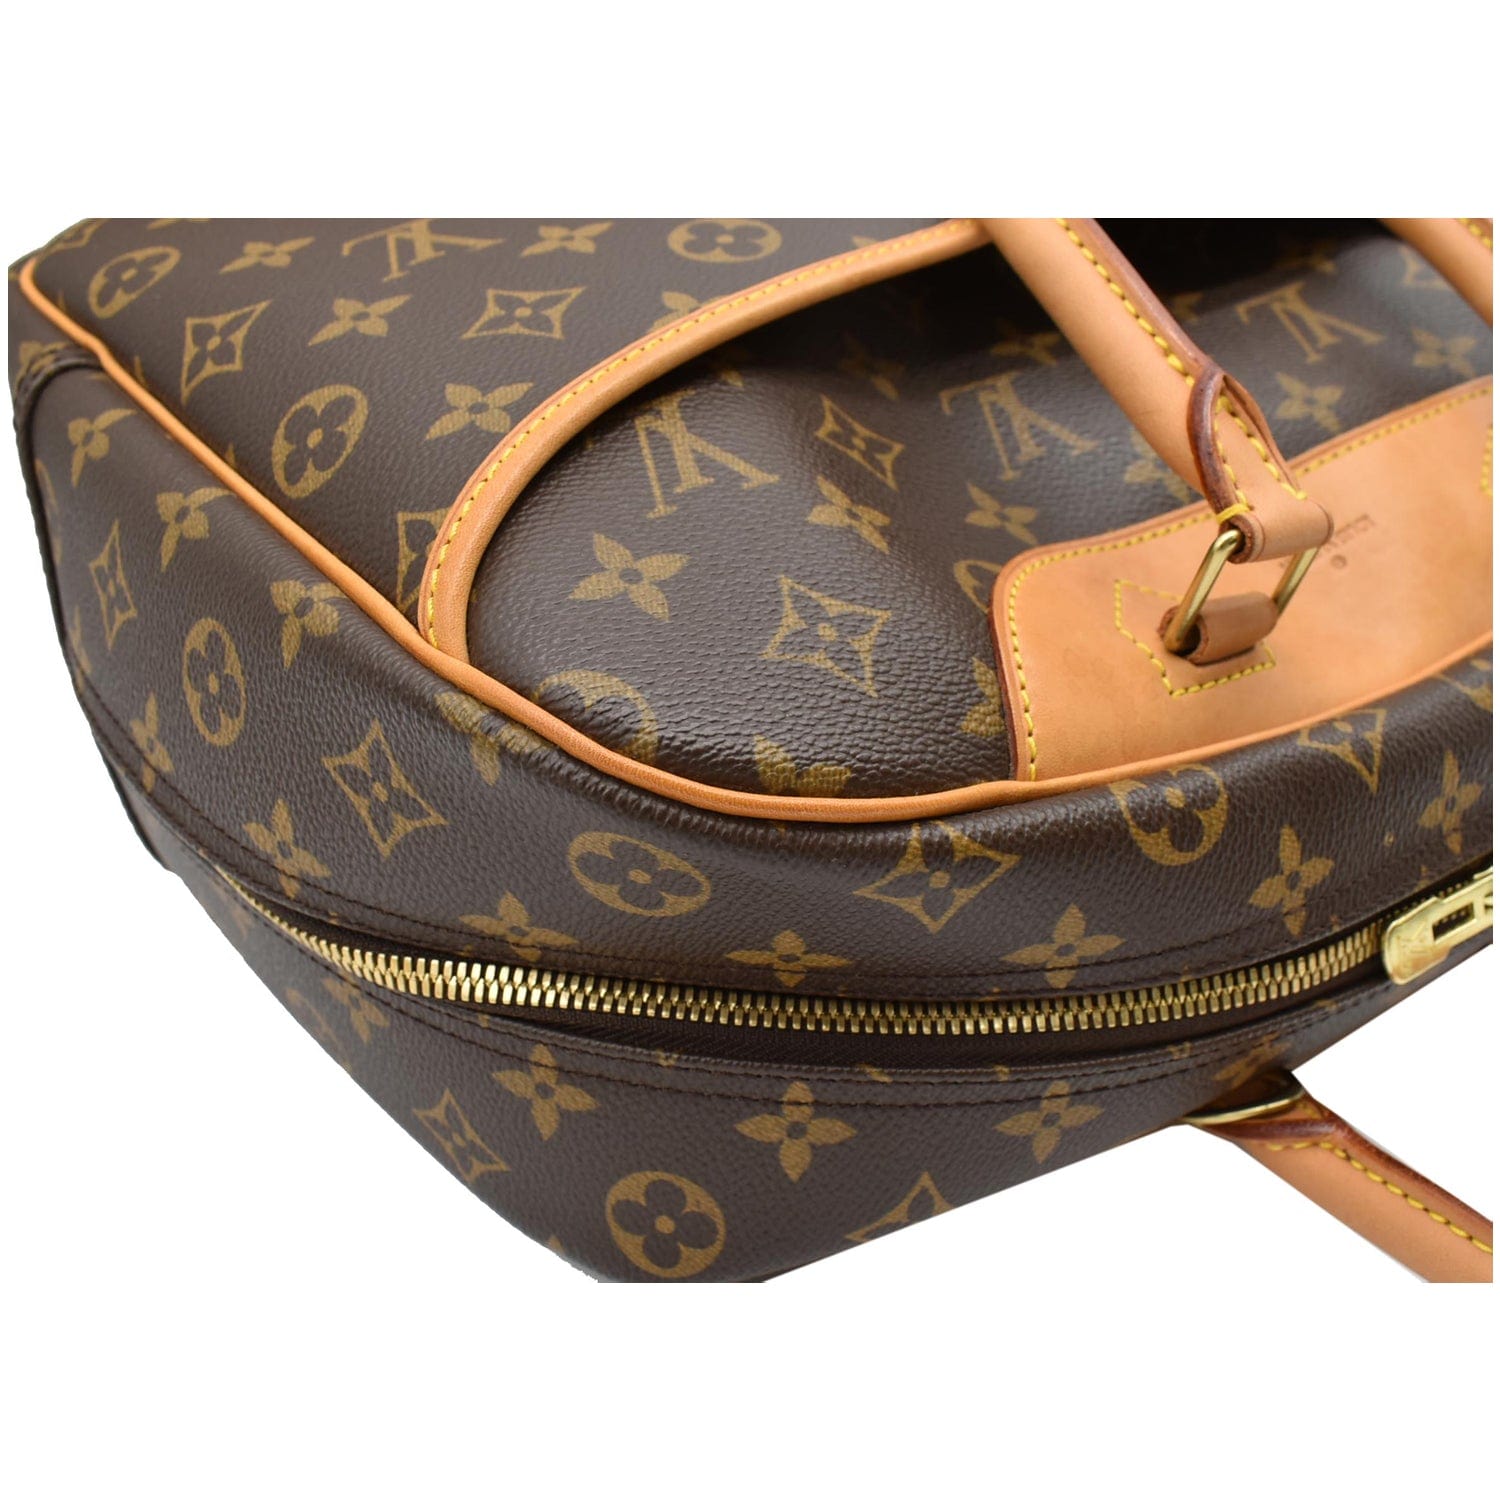 Louis Vuitton Deauville review & what's in my bag. 